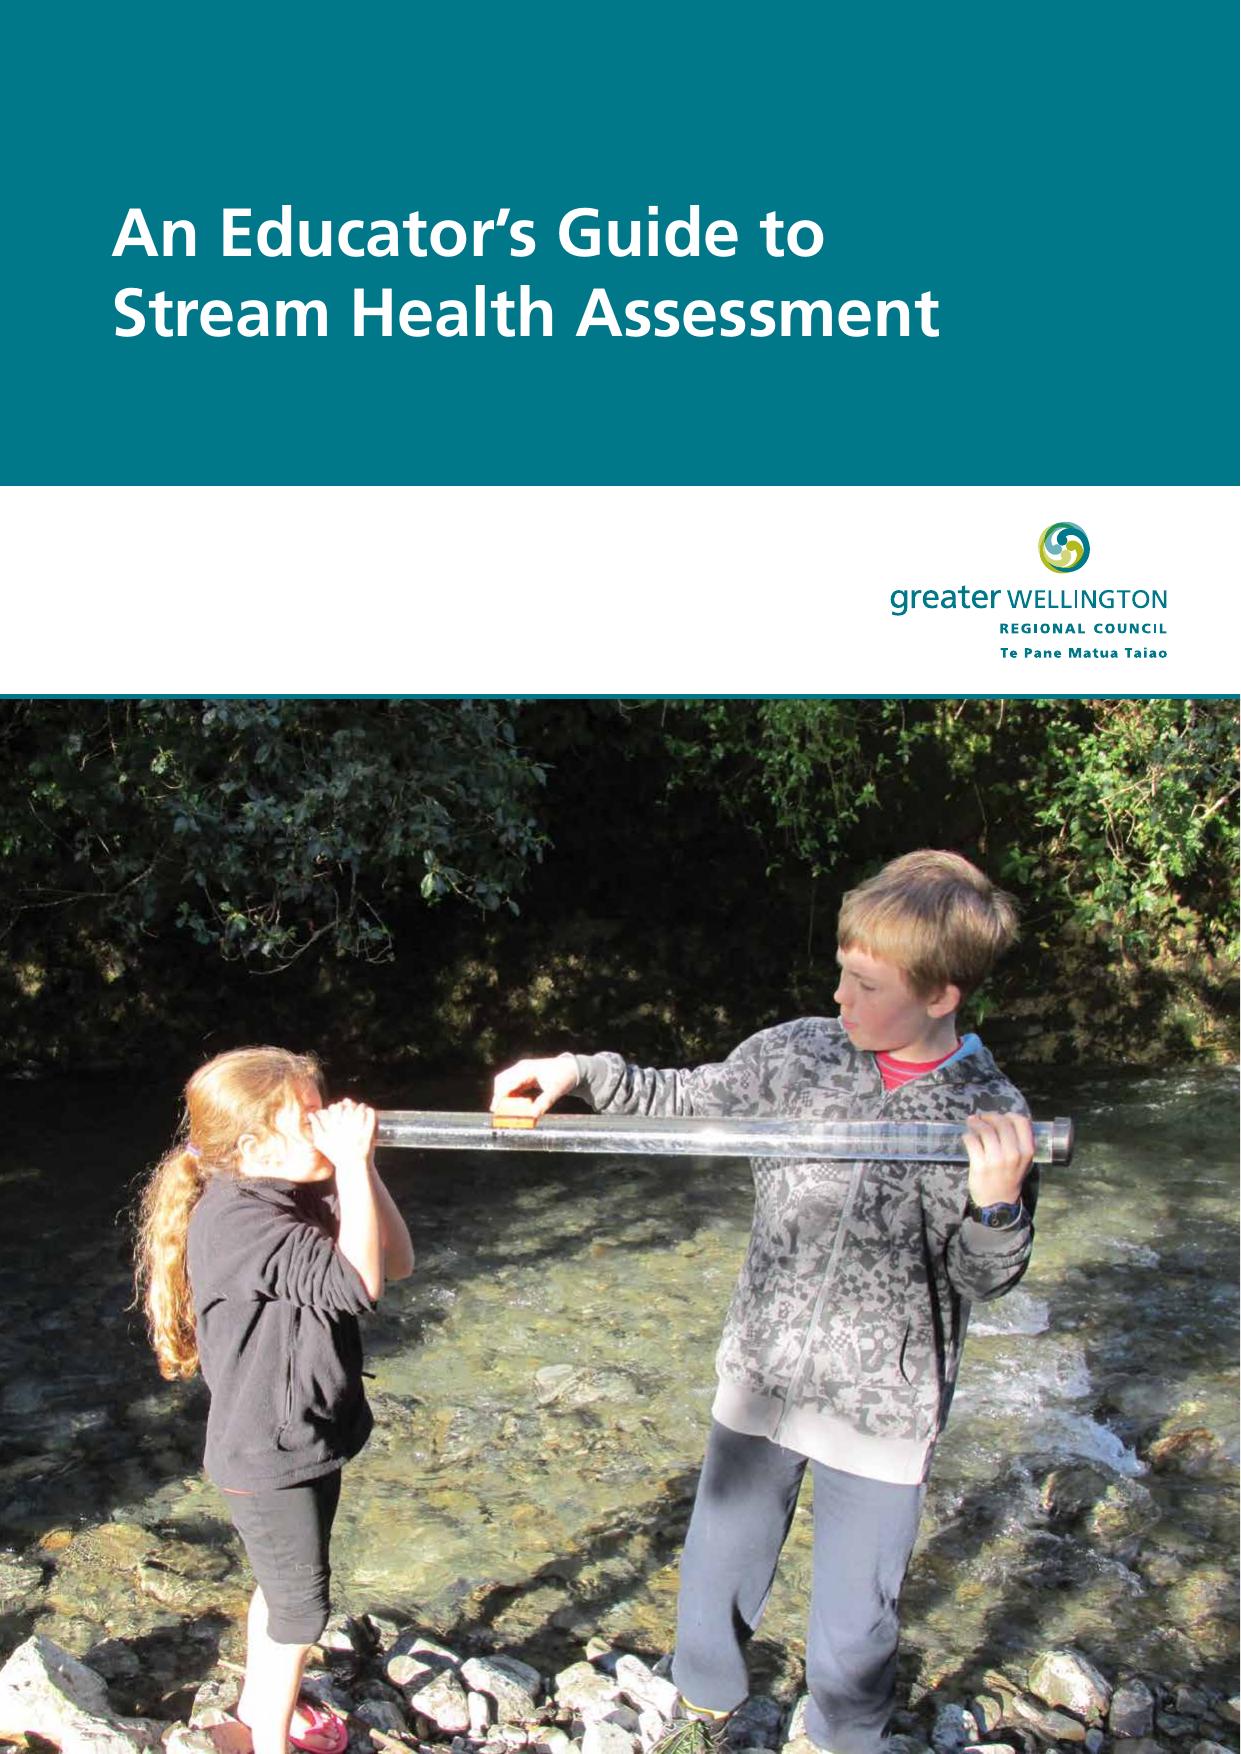 An Educator's Guide to Stream Health Assessment 2016